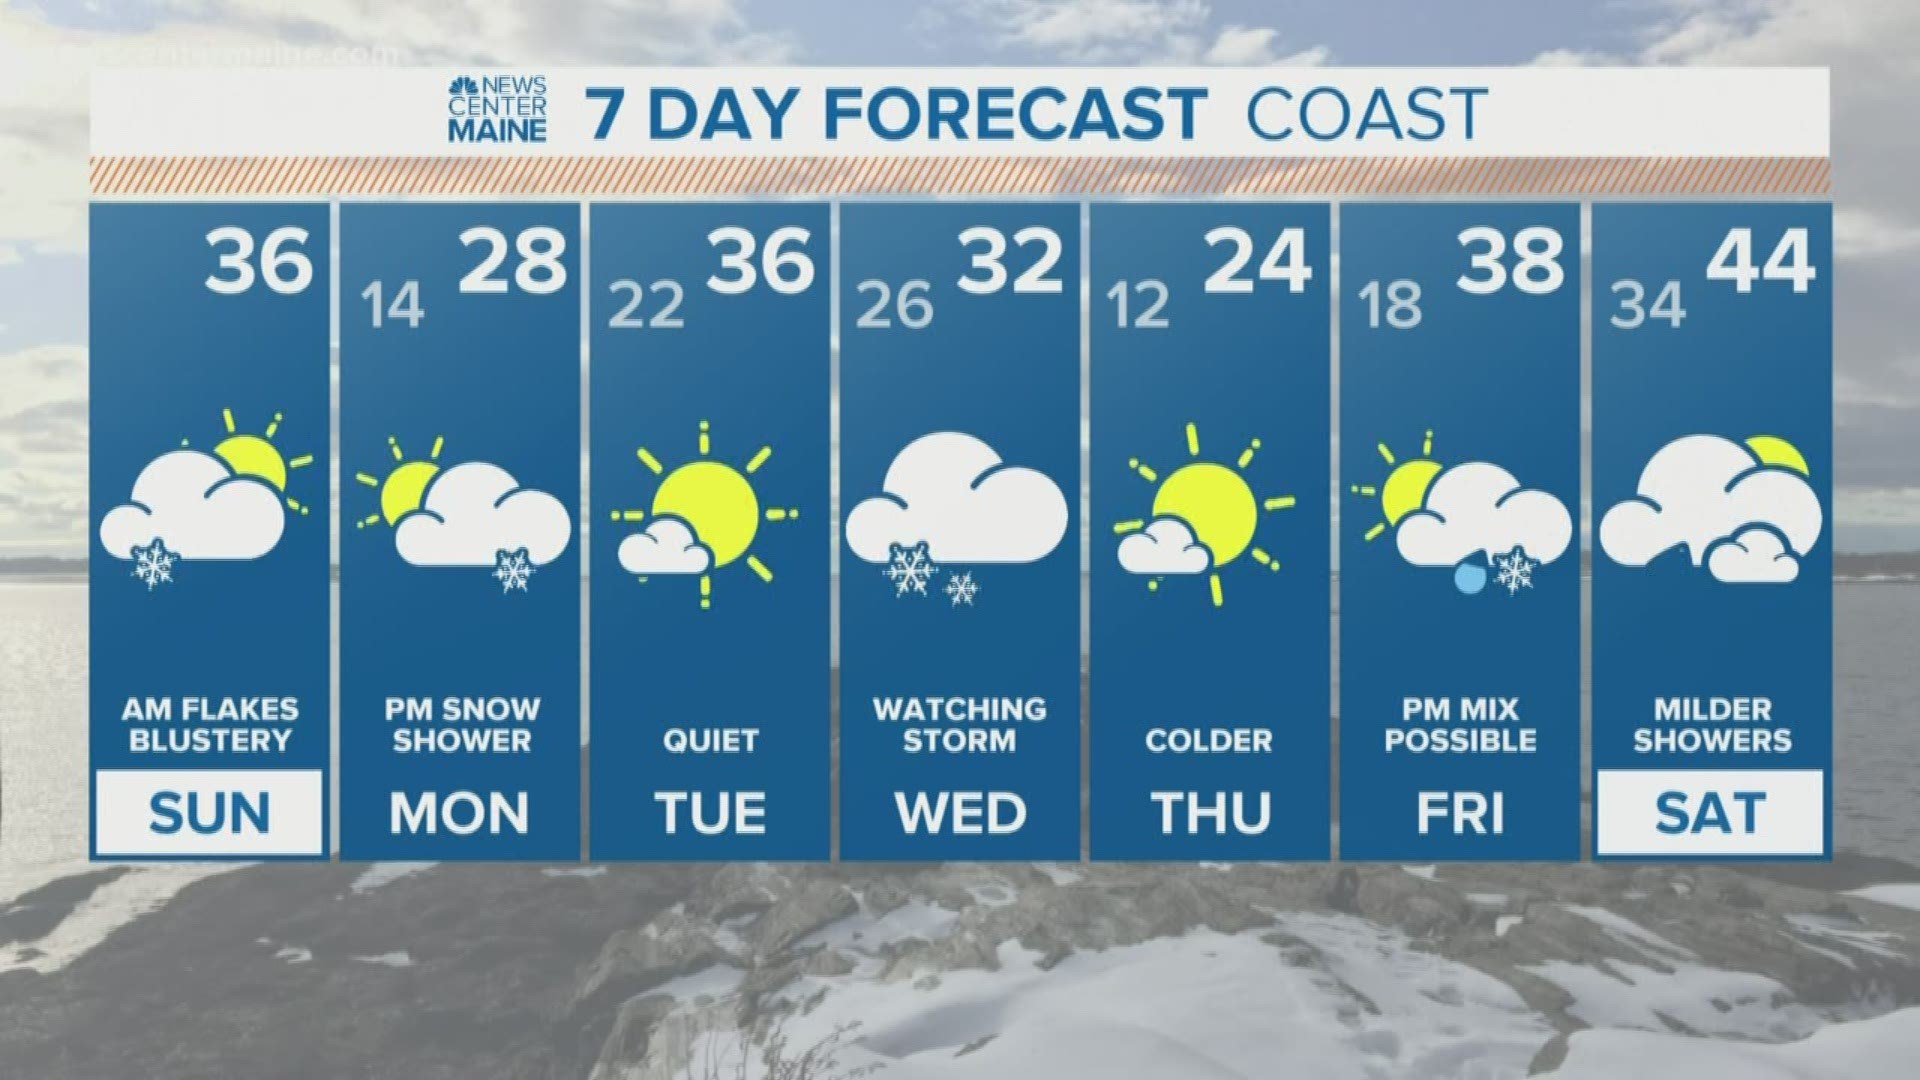 NEWS CENTER Maine Weather Video Forecast. Updated on 1/5/2020 at 8 am.